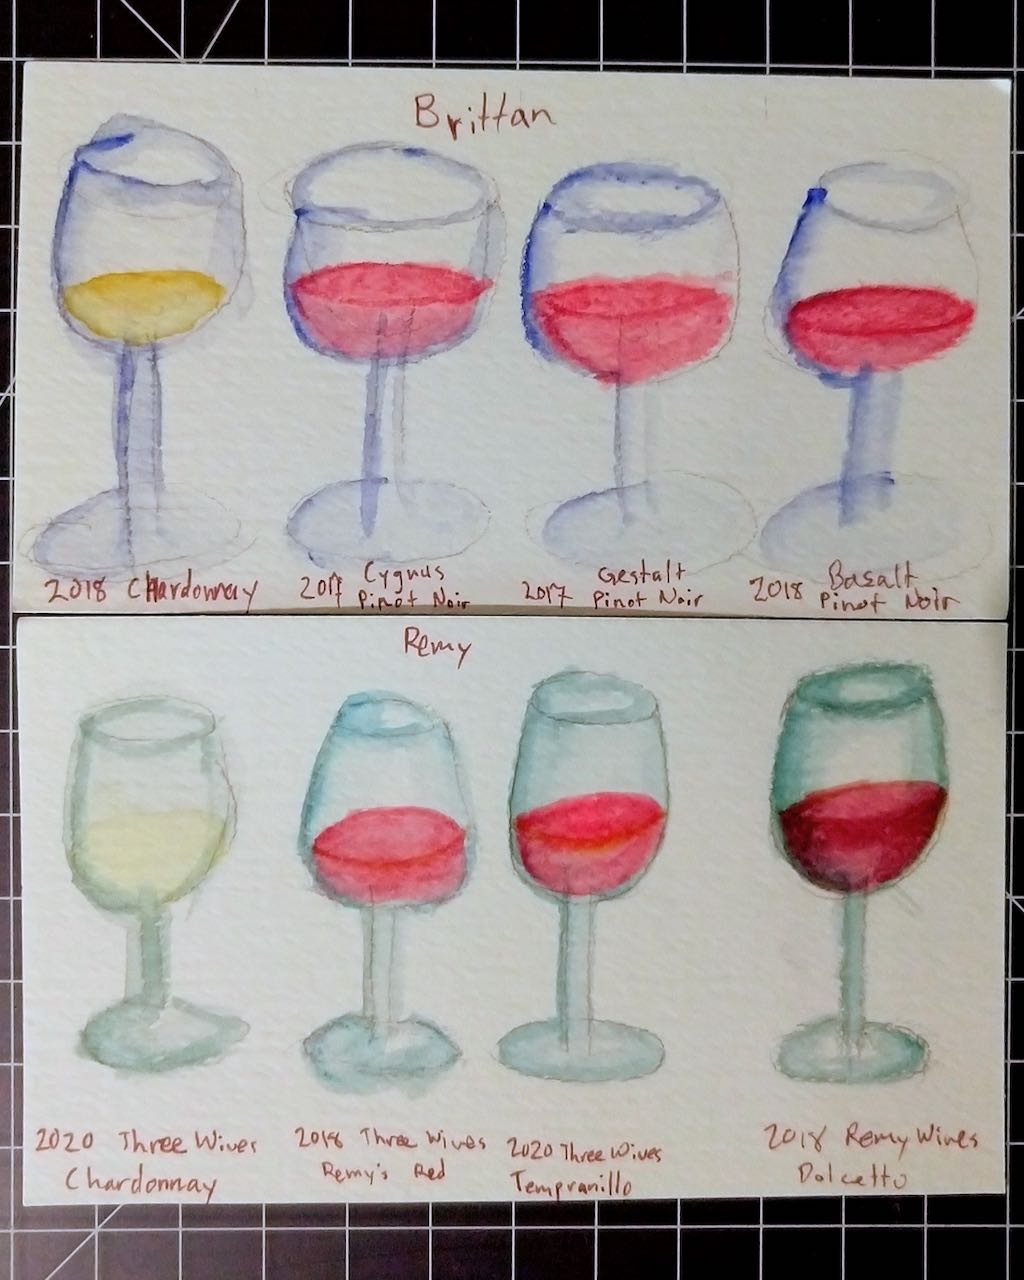 Watercolor paintings of 8 different glasses of wine.